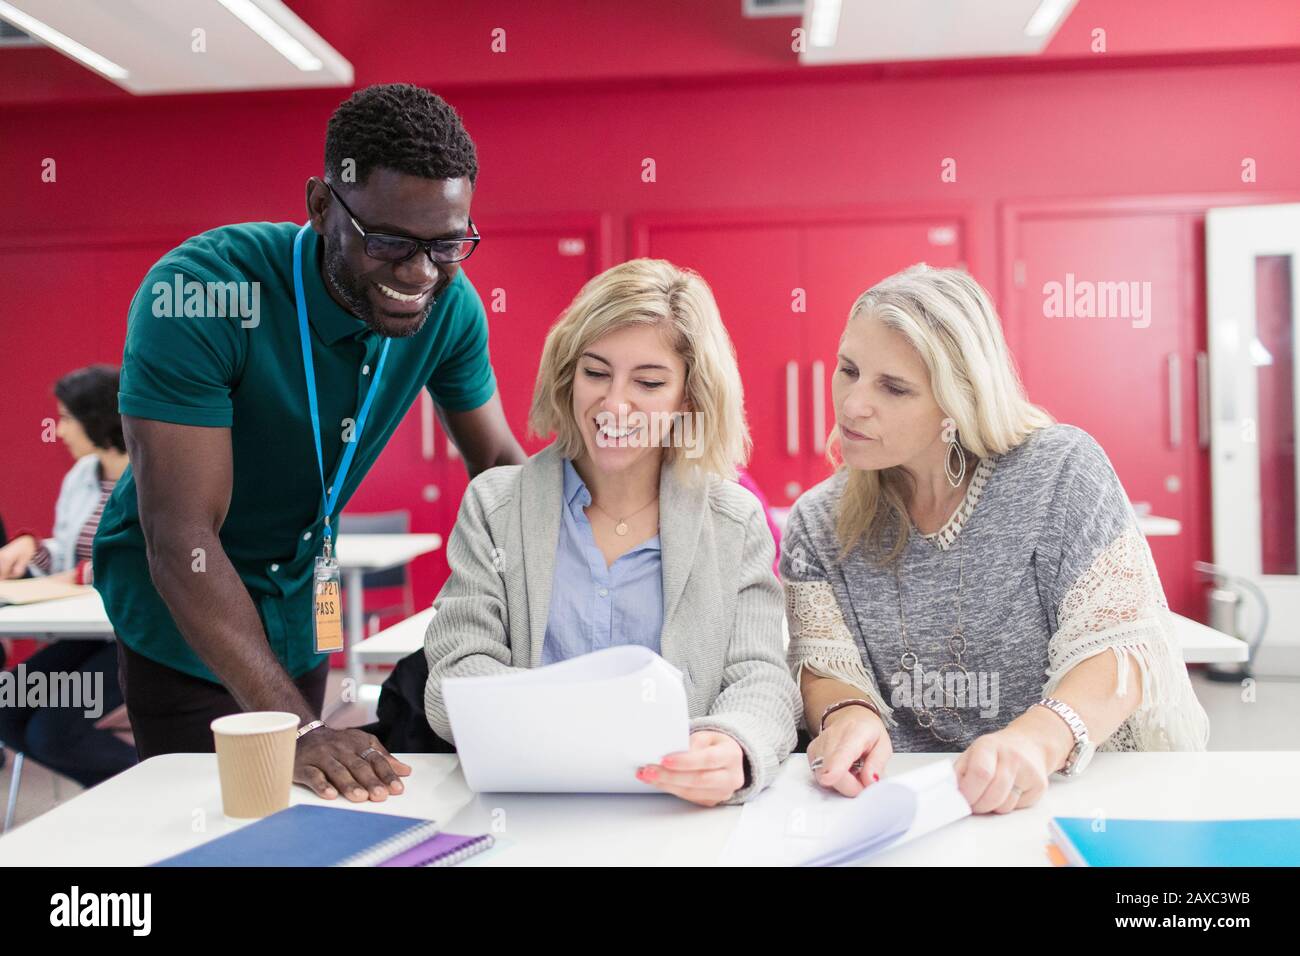 Student Pretending Not To Listen To His Teacher Standing Near Him Stock  Image - Image of classroom, discussion: 139587523